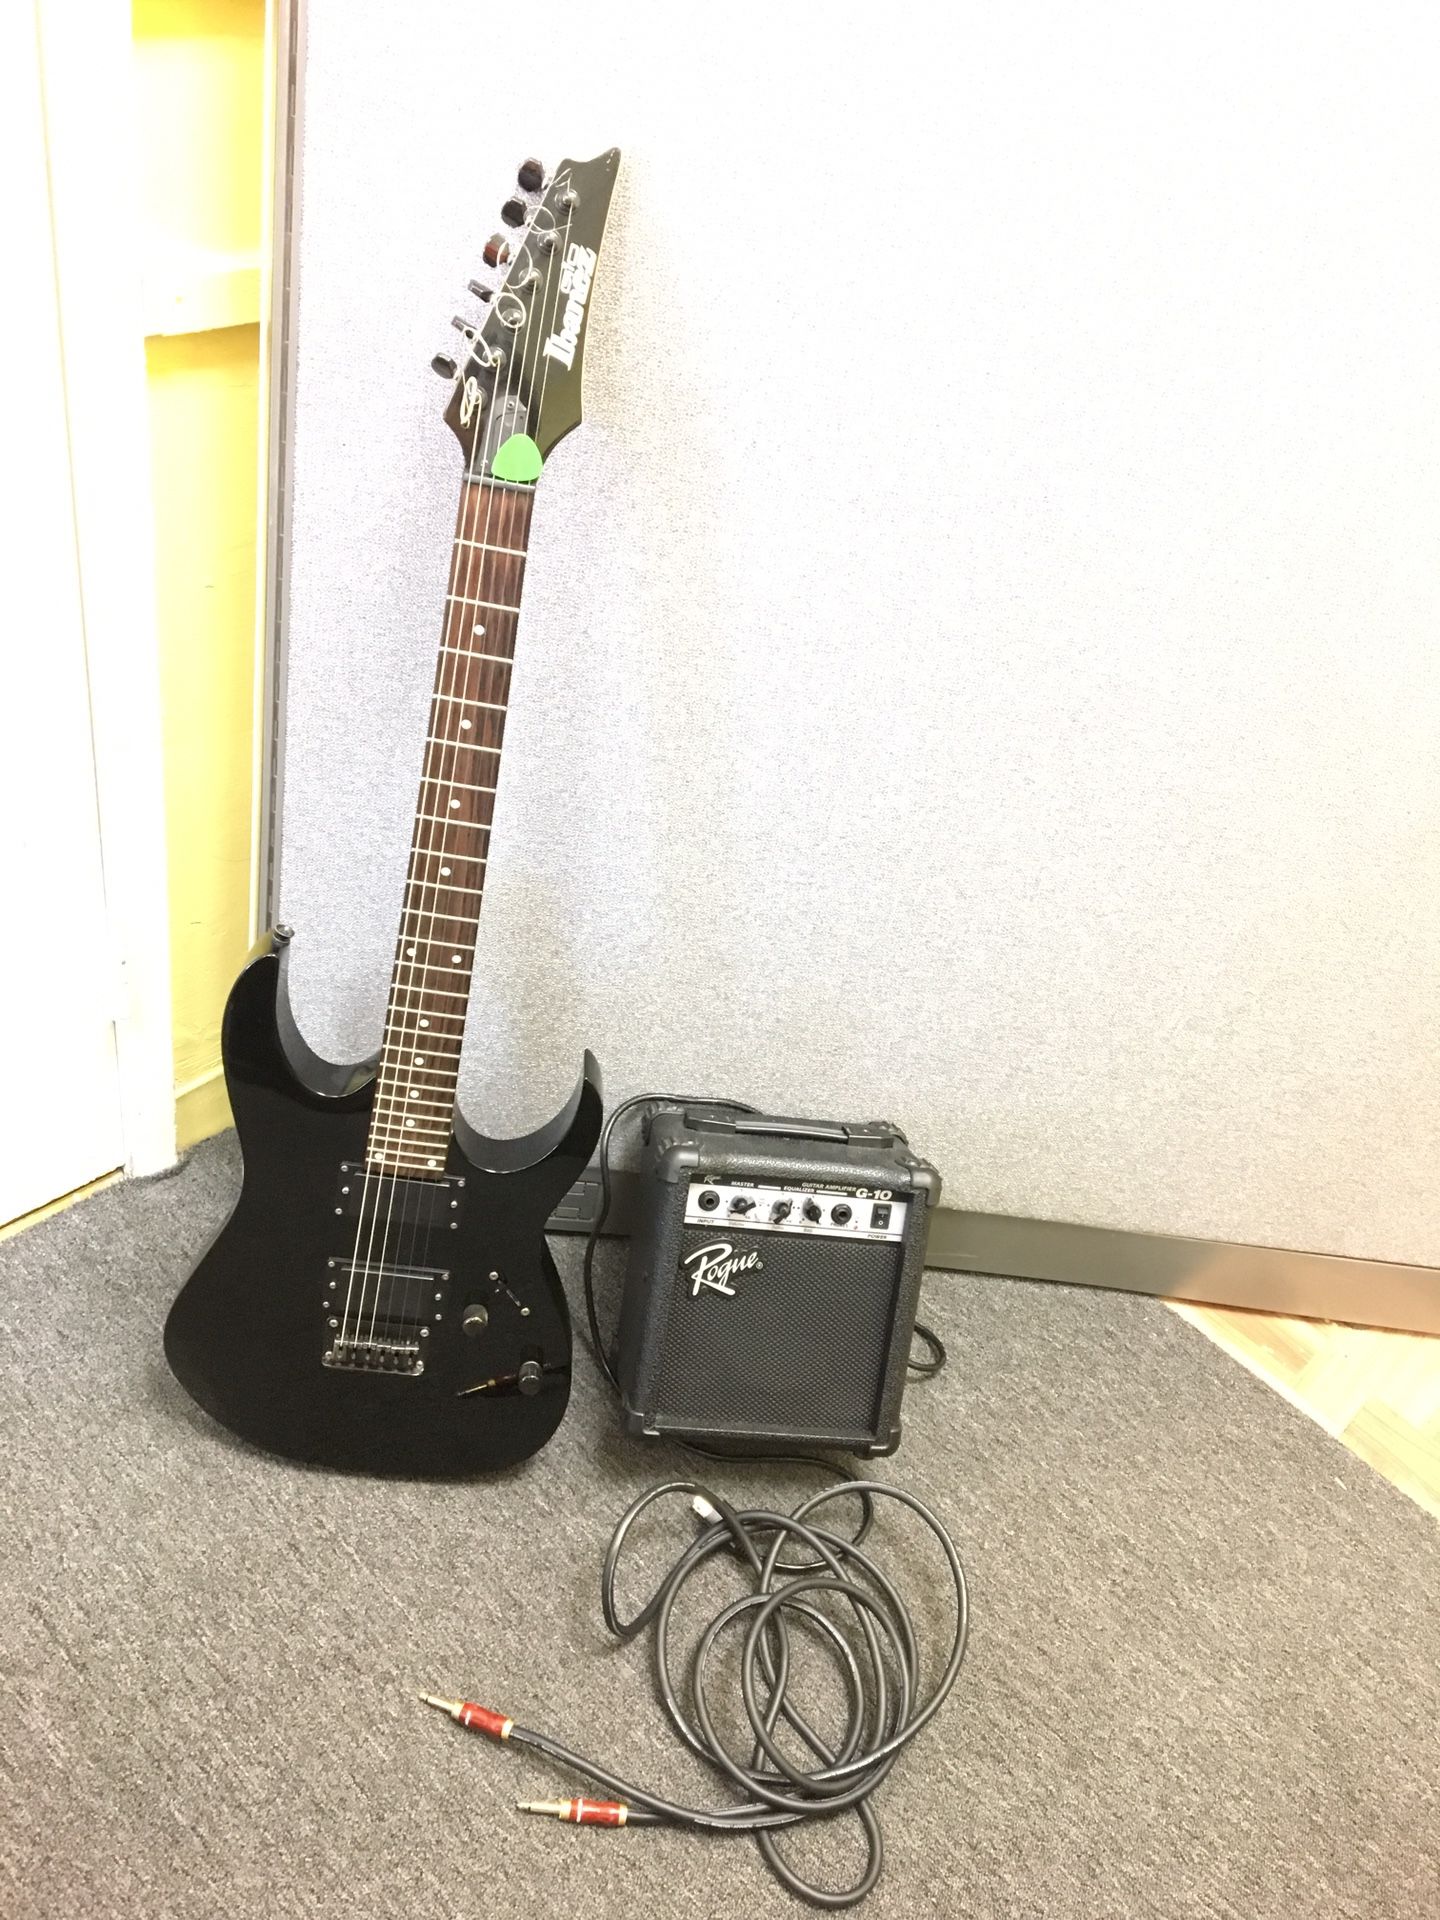 Ibanez Gio electric guitar with amp & cable (come and test)